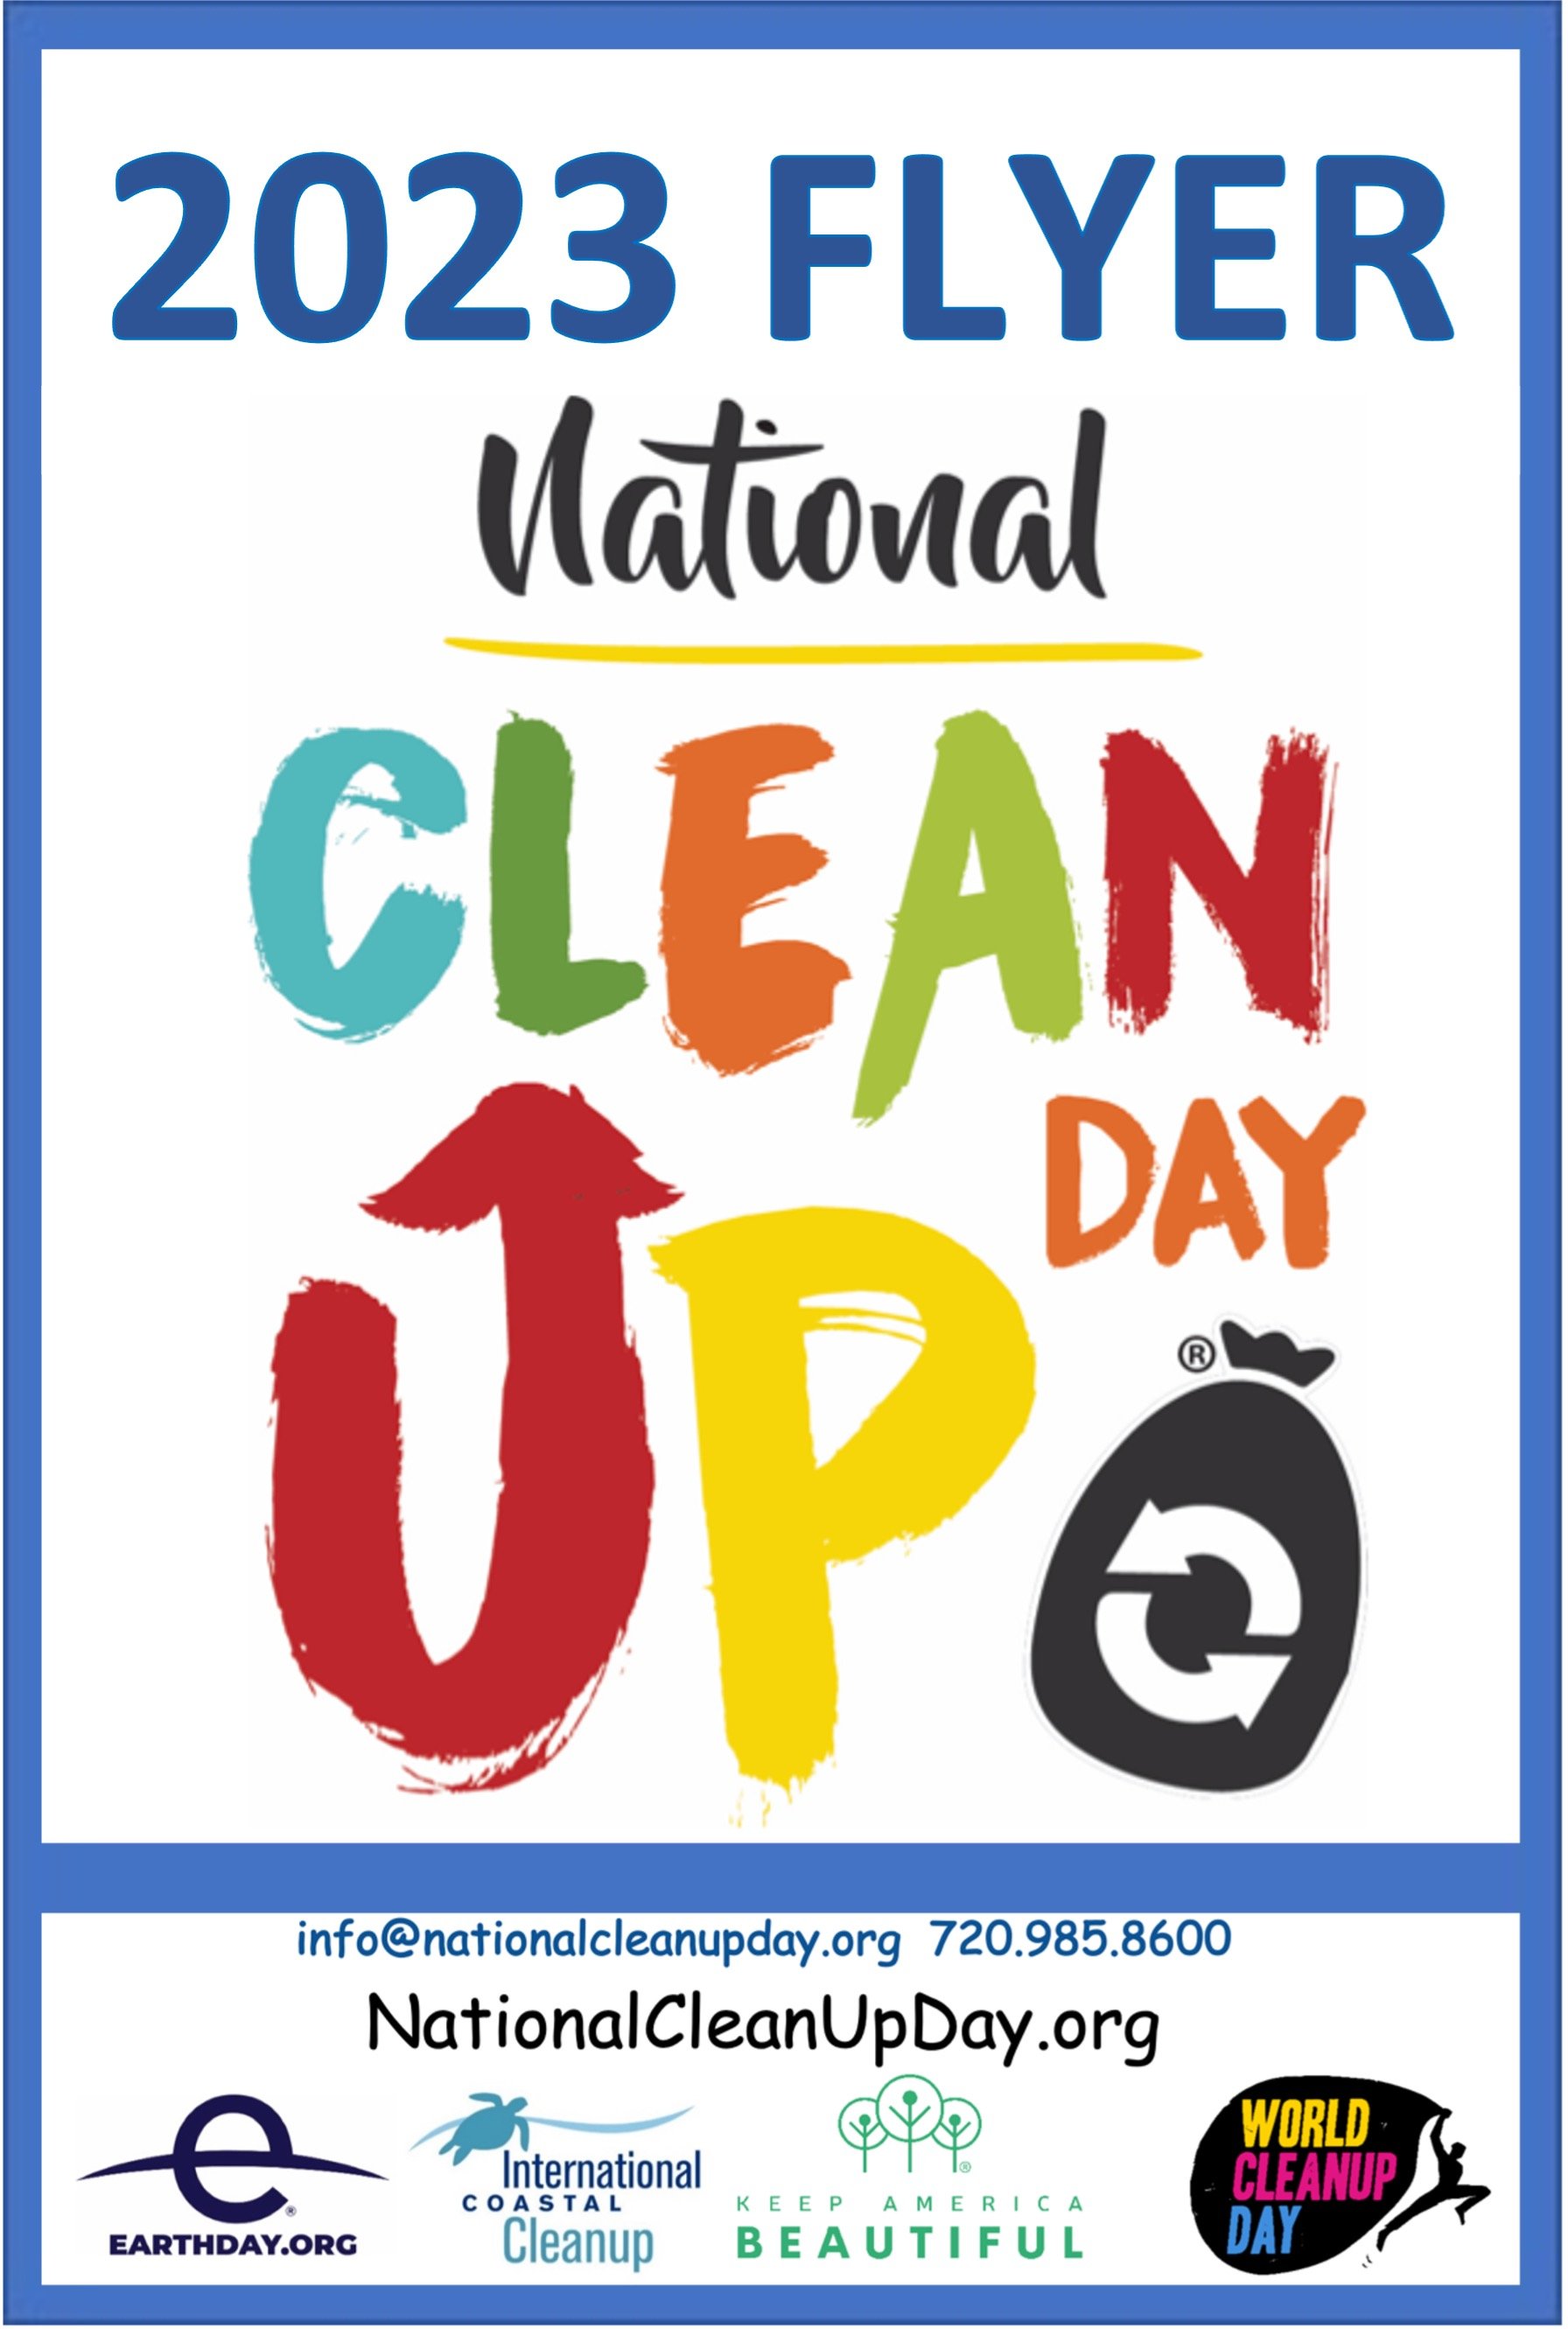 National CleanUp Day Flyer TEMPLATE with Blue Background for Squarespace Downloadable Flyer.jpg